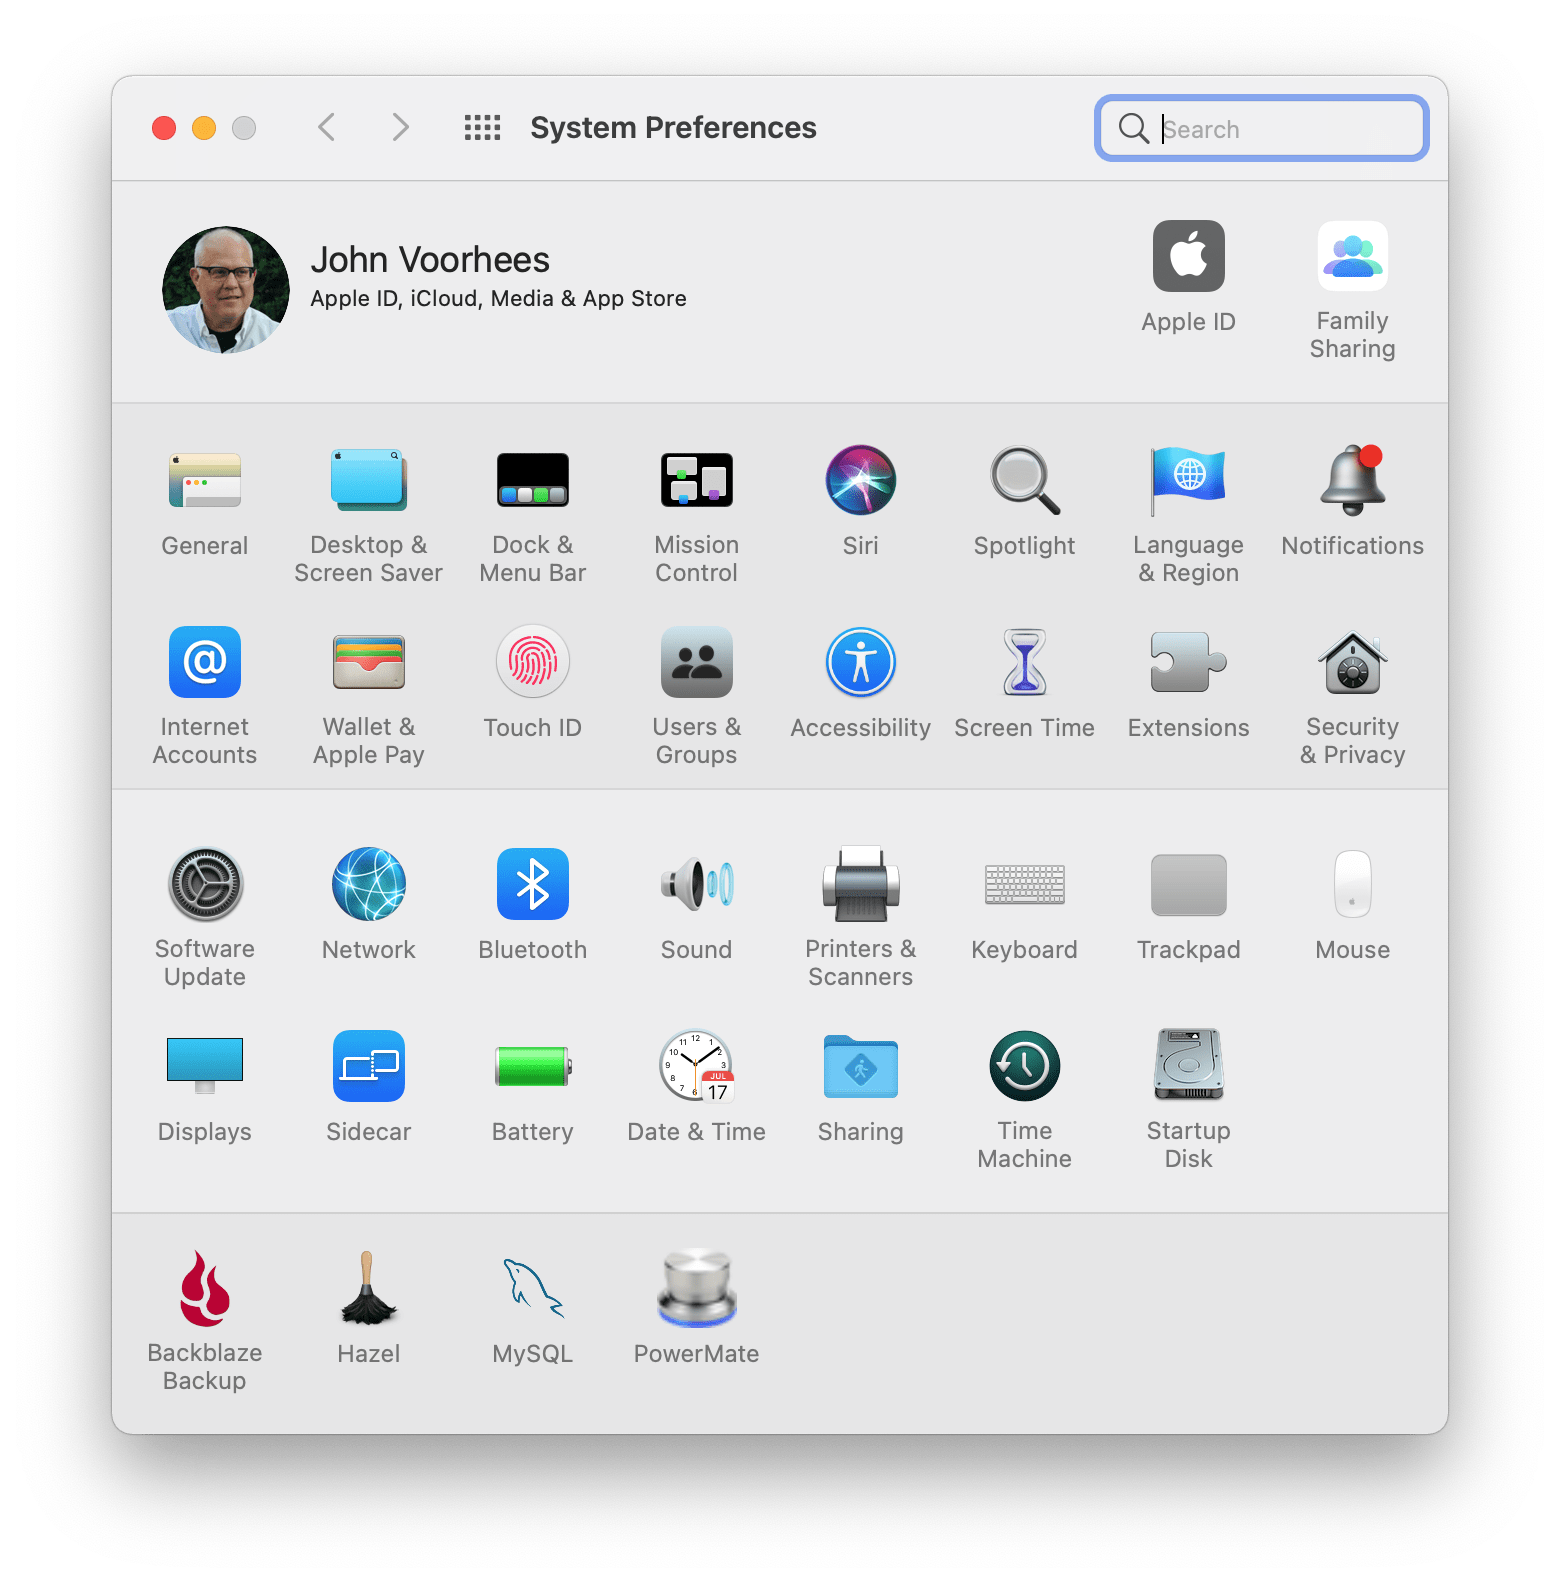 System Preferences includes a new set of icons to match Big Sur's redesign.